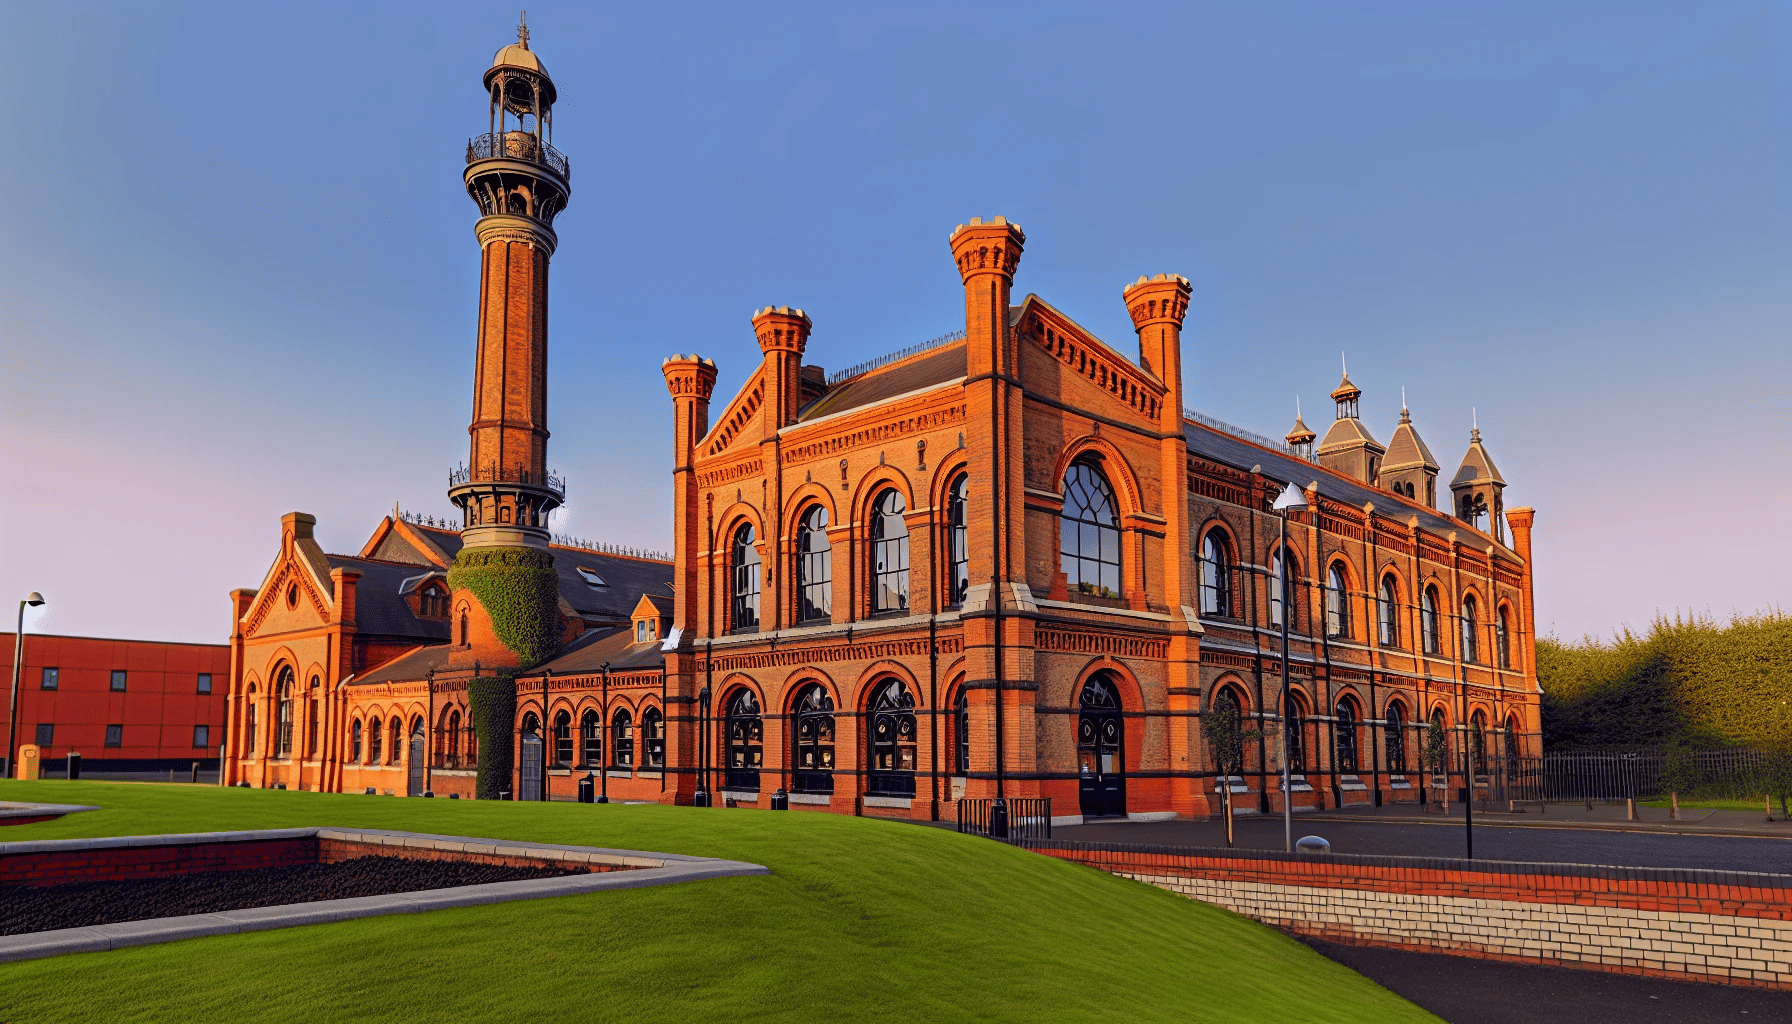 The historic Pump House preserving late Victorian architecture in Belfast